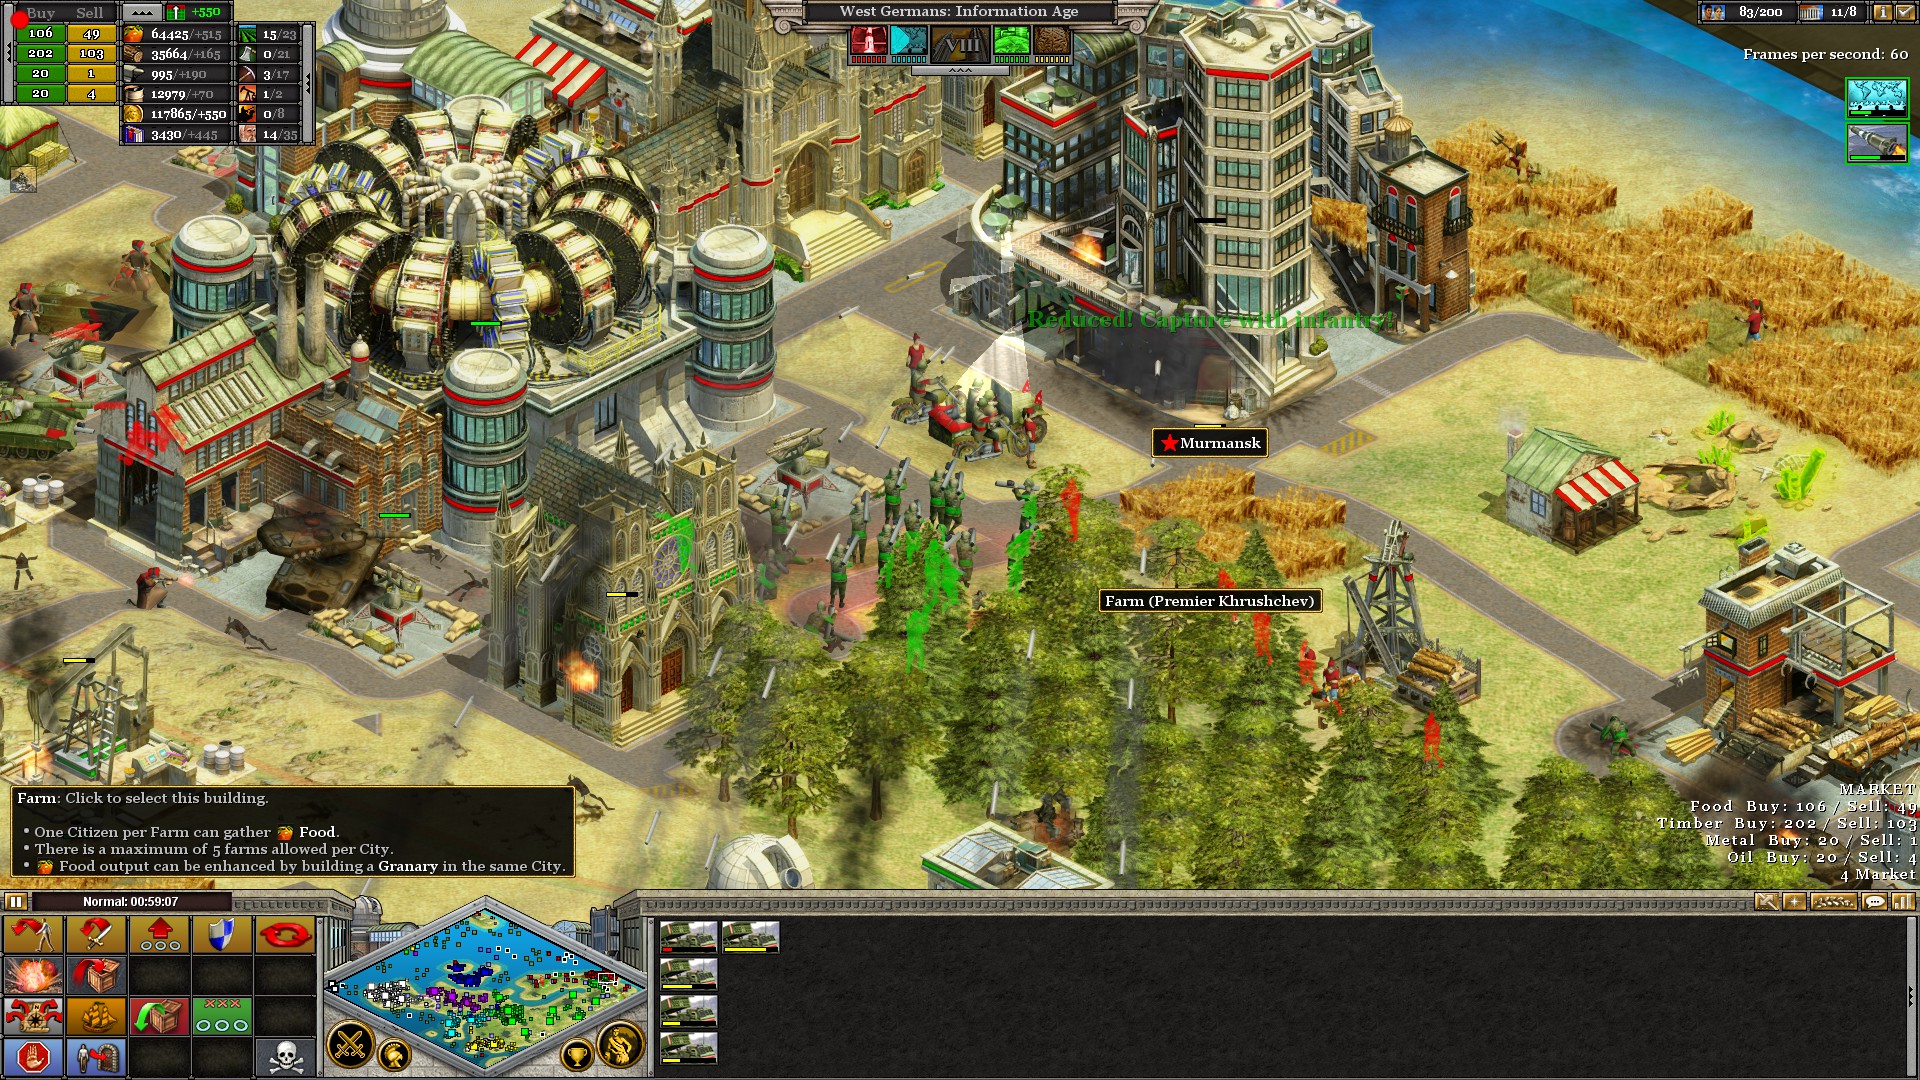 rise of nations for mac